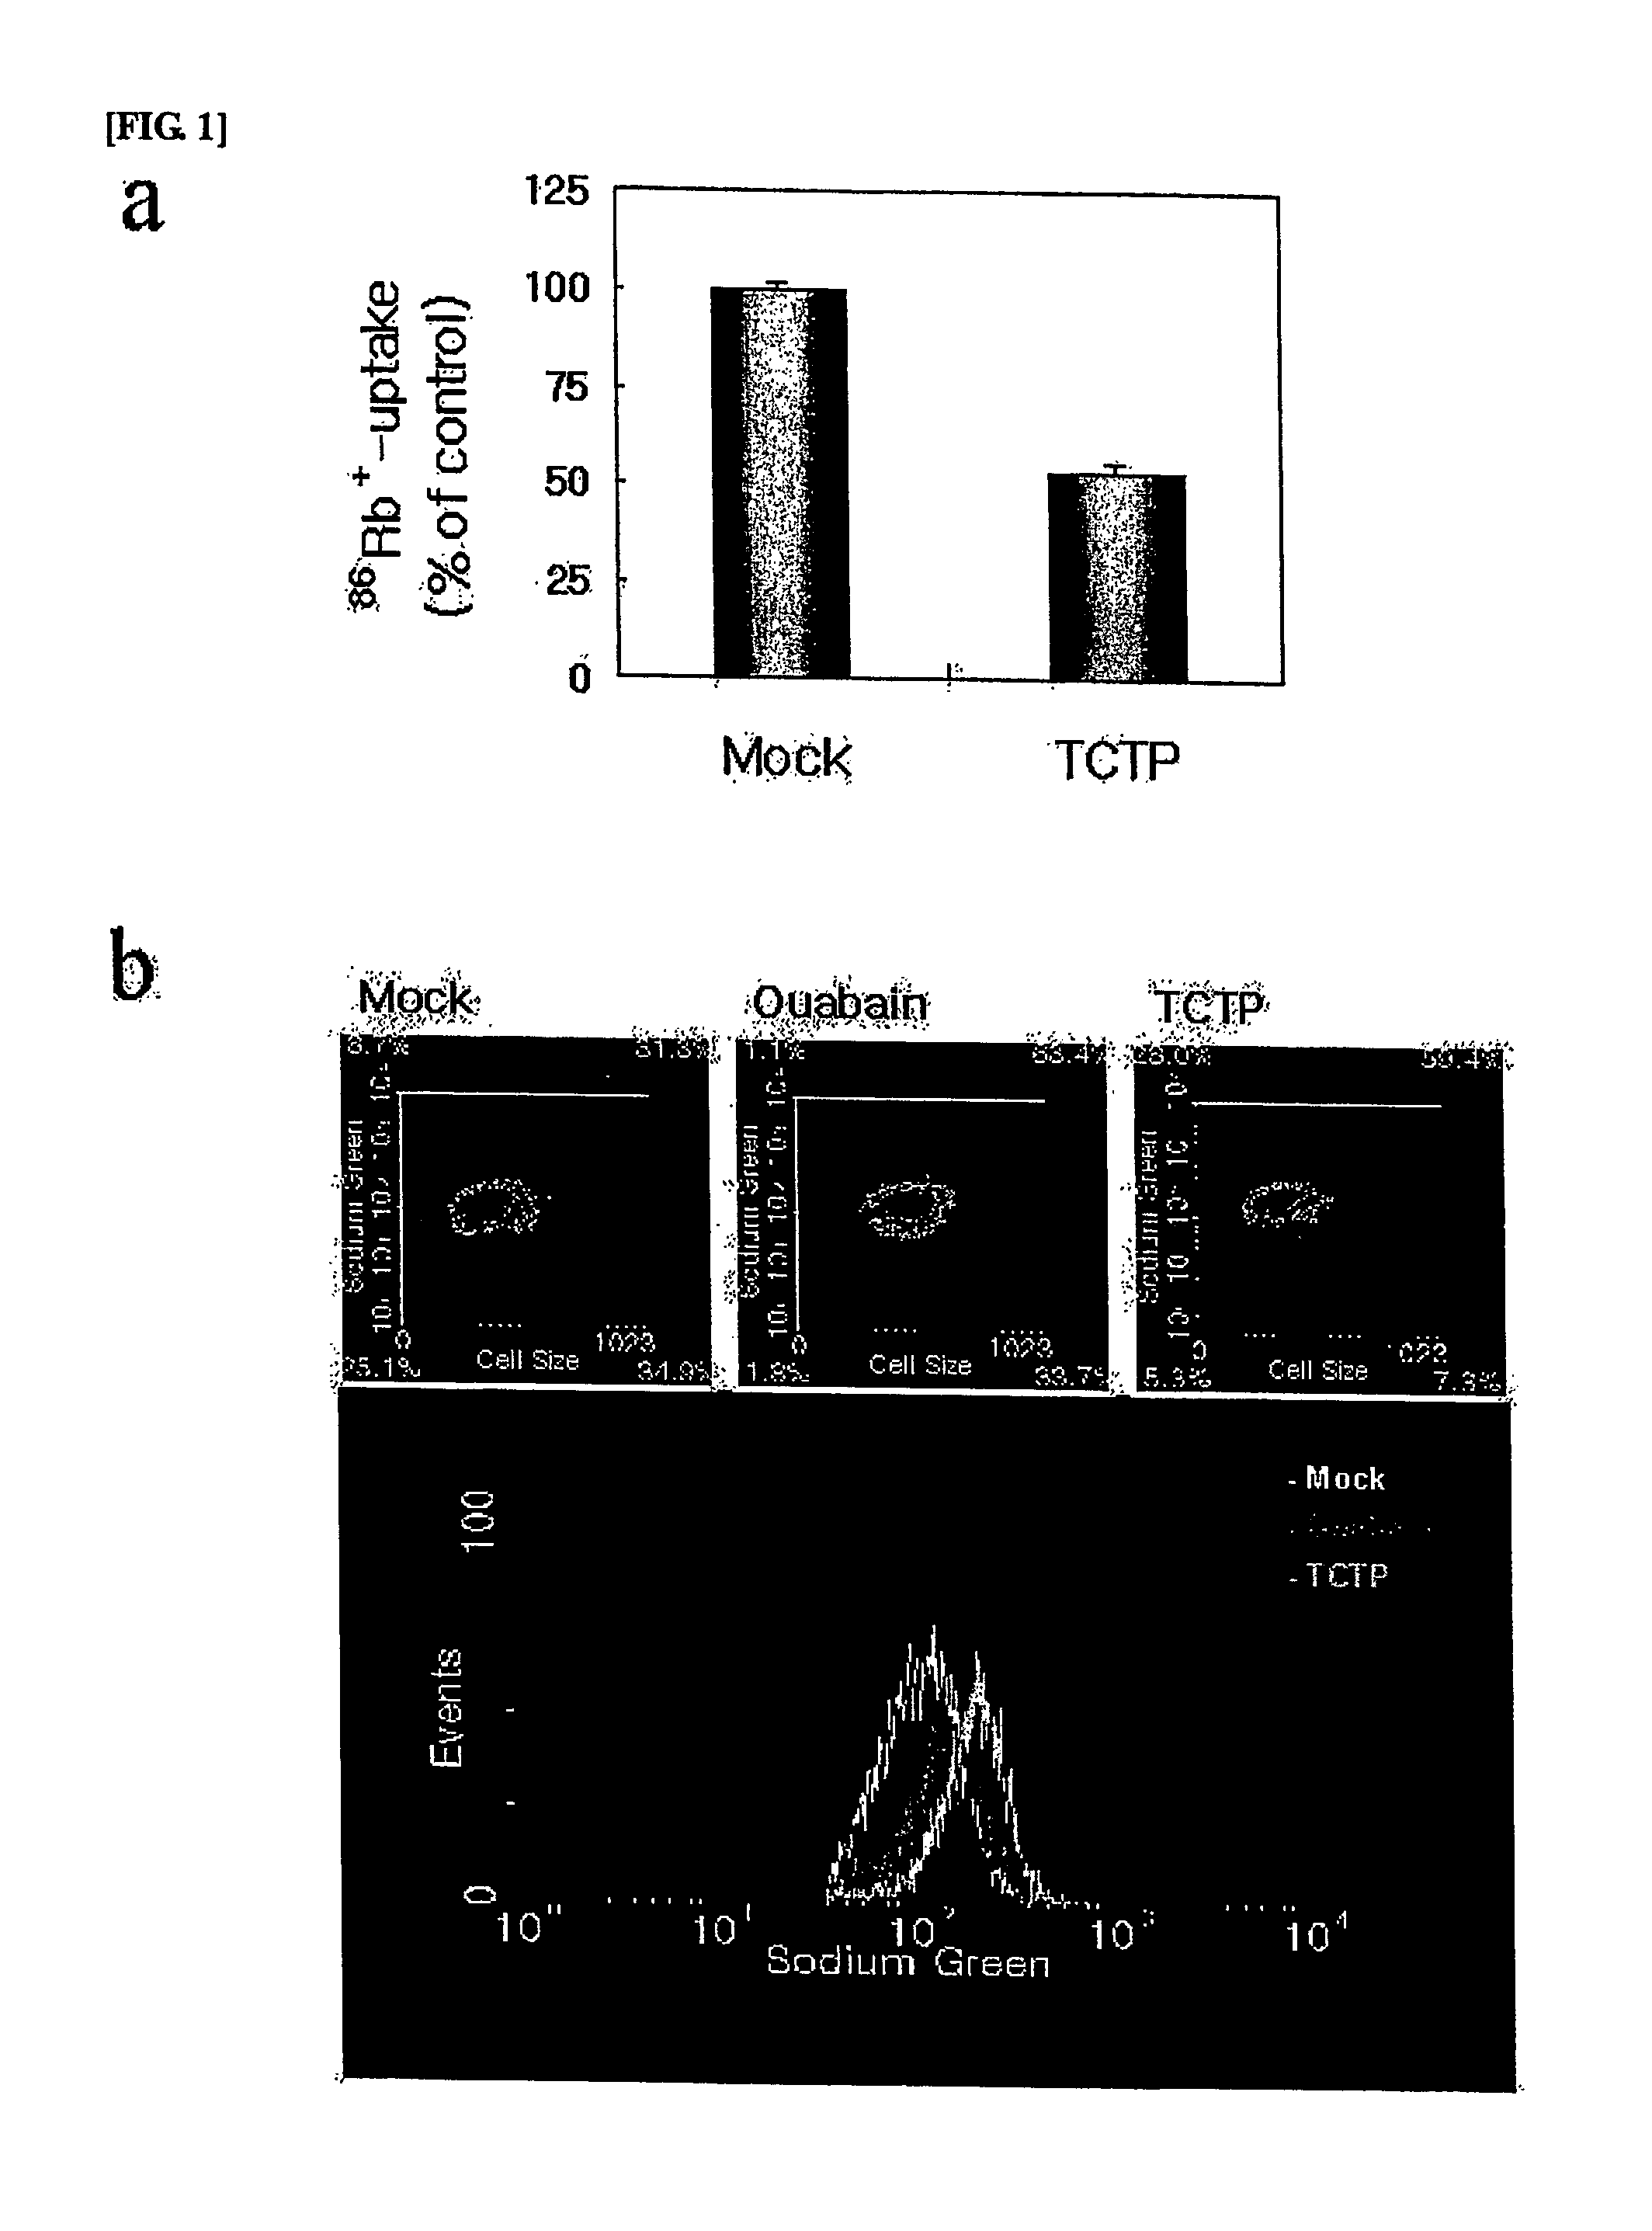 Composition For Screening Anti-Hypertension Drug Comprising Mammal Tctp Gene or Its Protein Product, and Method For Screening Anti-Hypertension Drug Using Said Composition